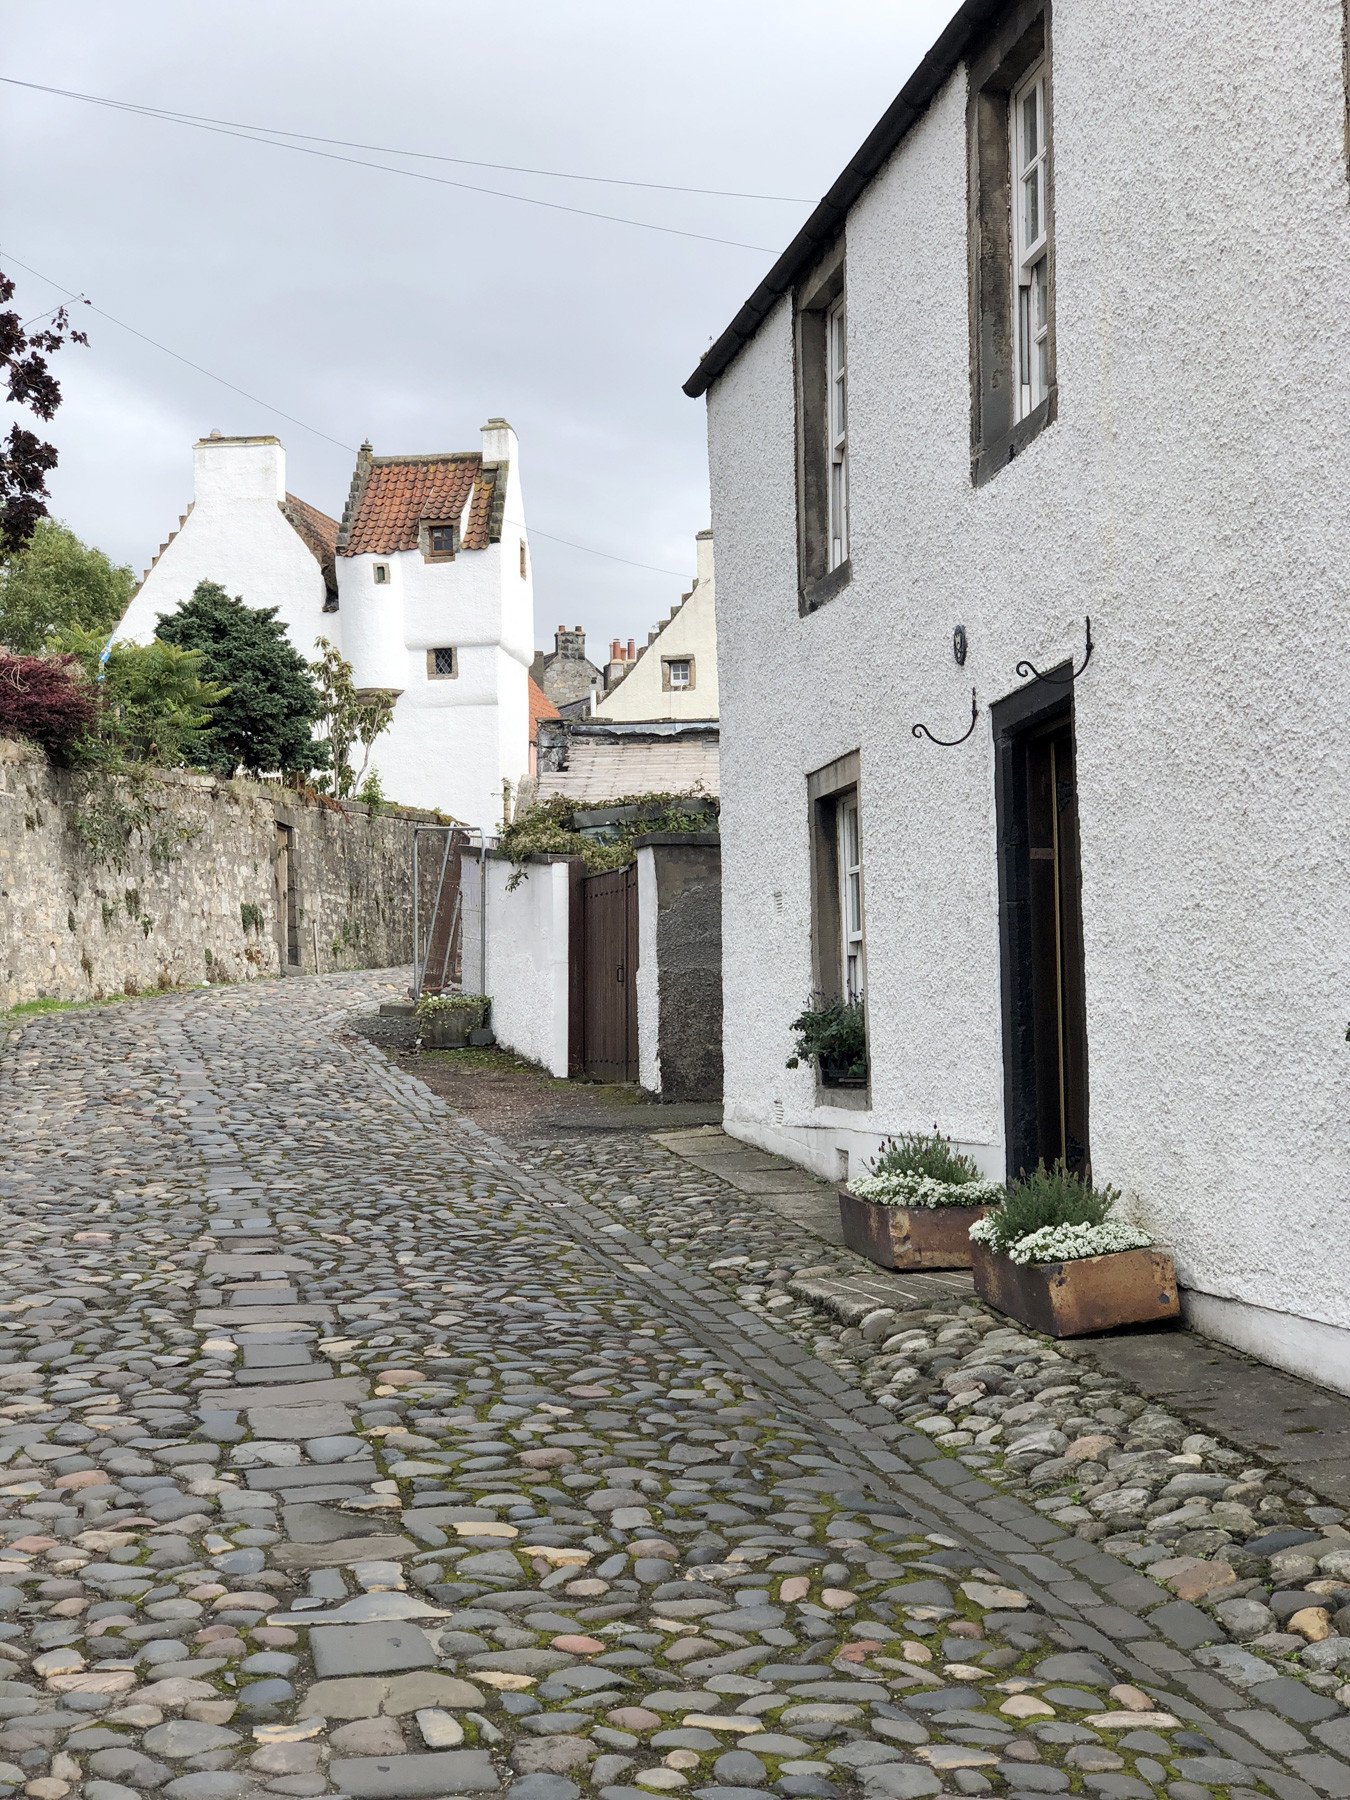 winding, cobbled street with old white houses in Culross, Scotland